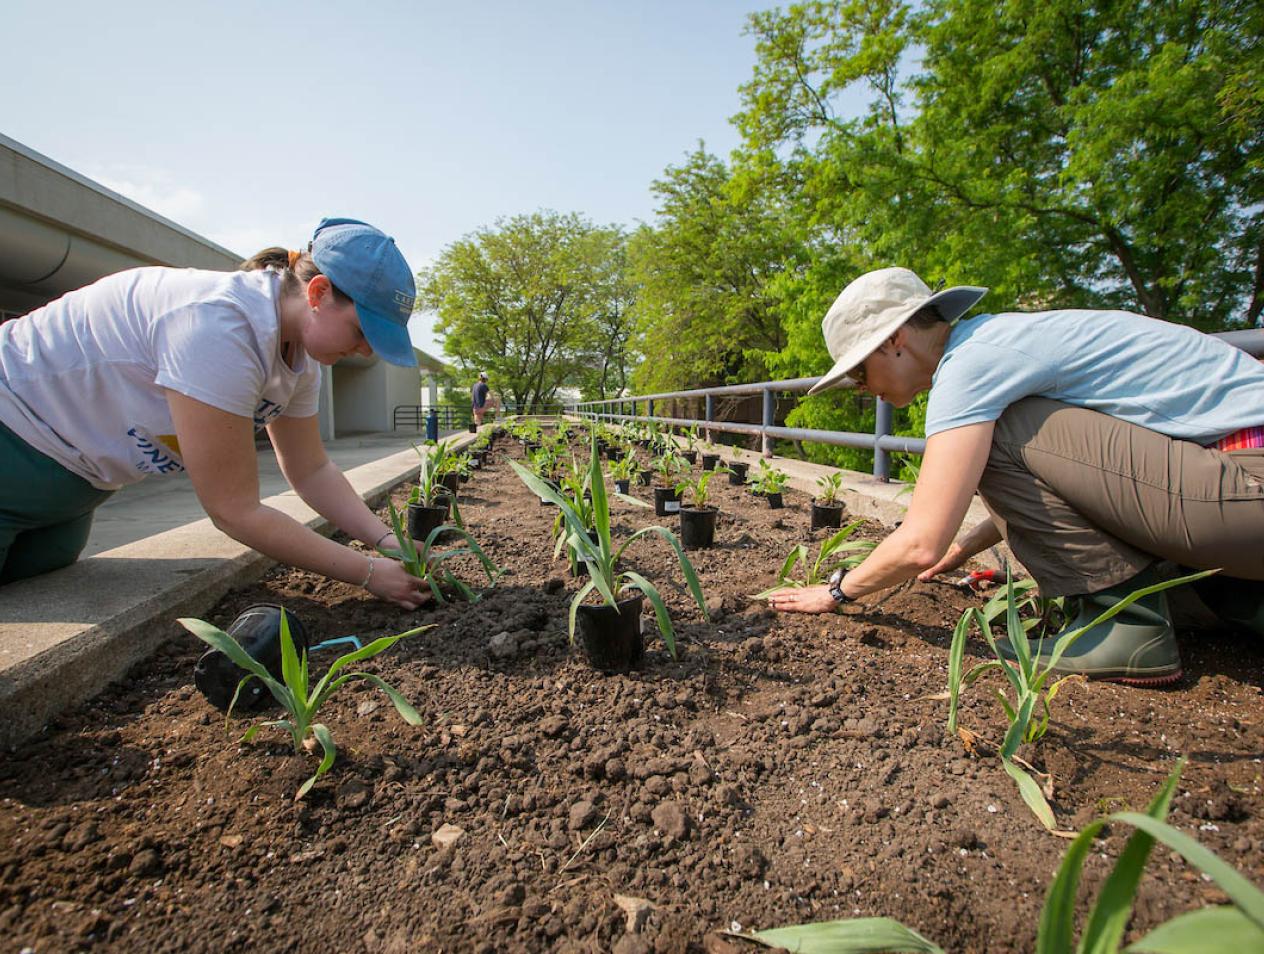 Two people cultivating garden on campus